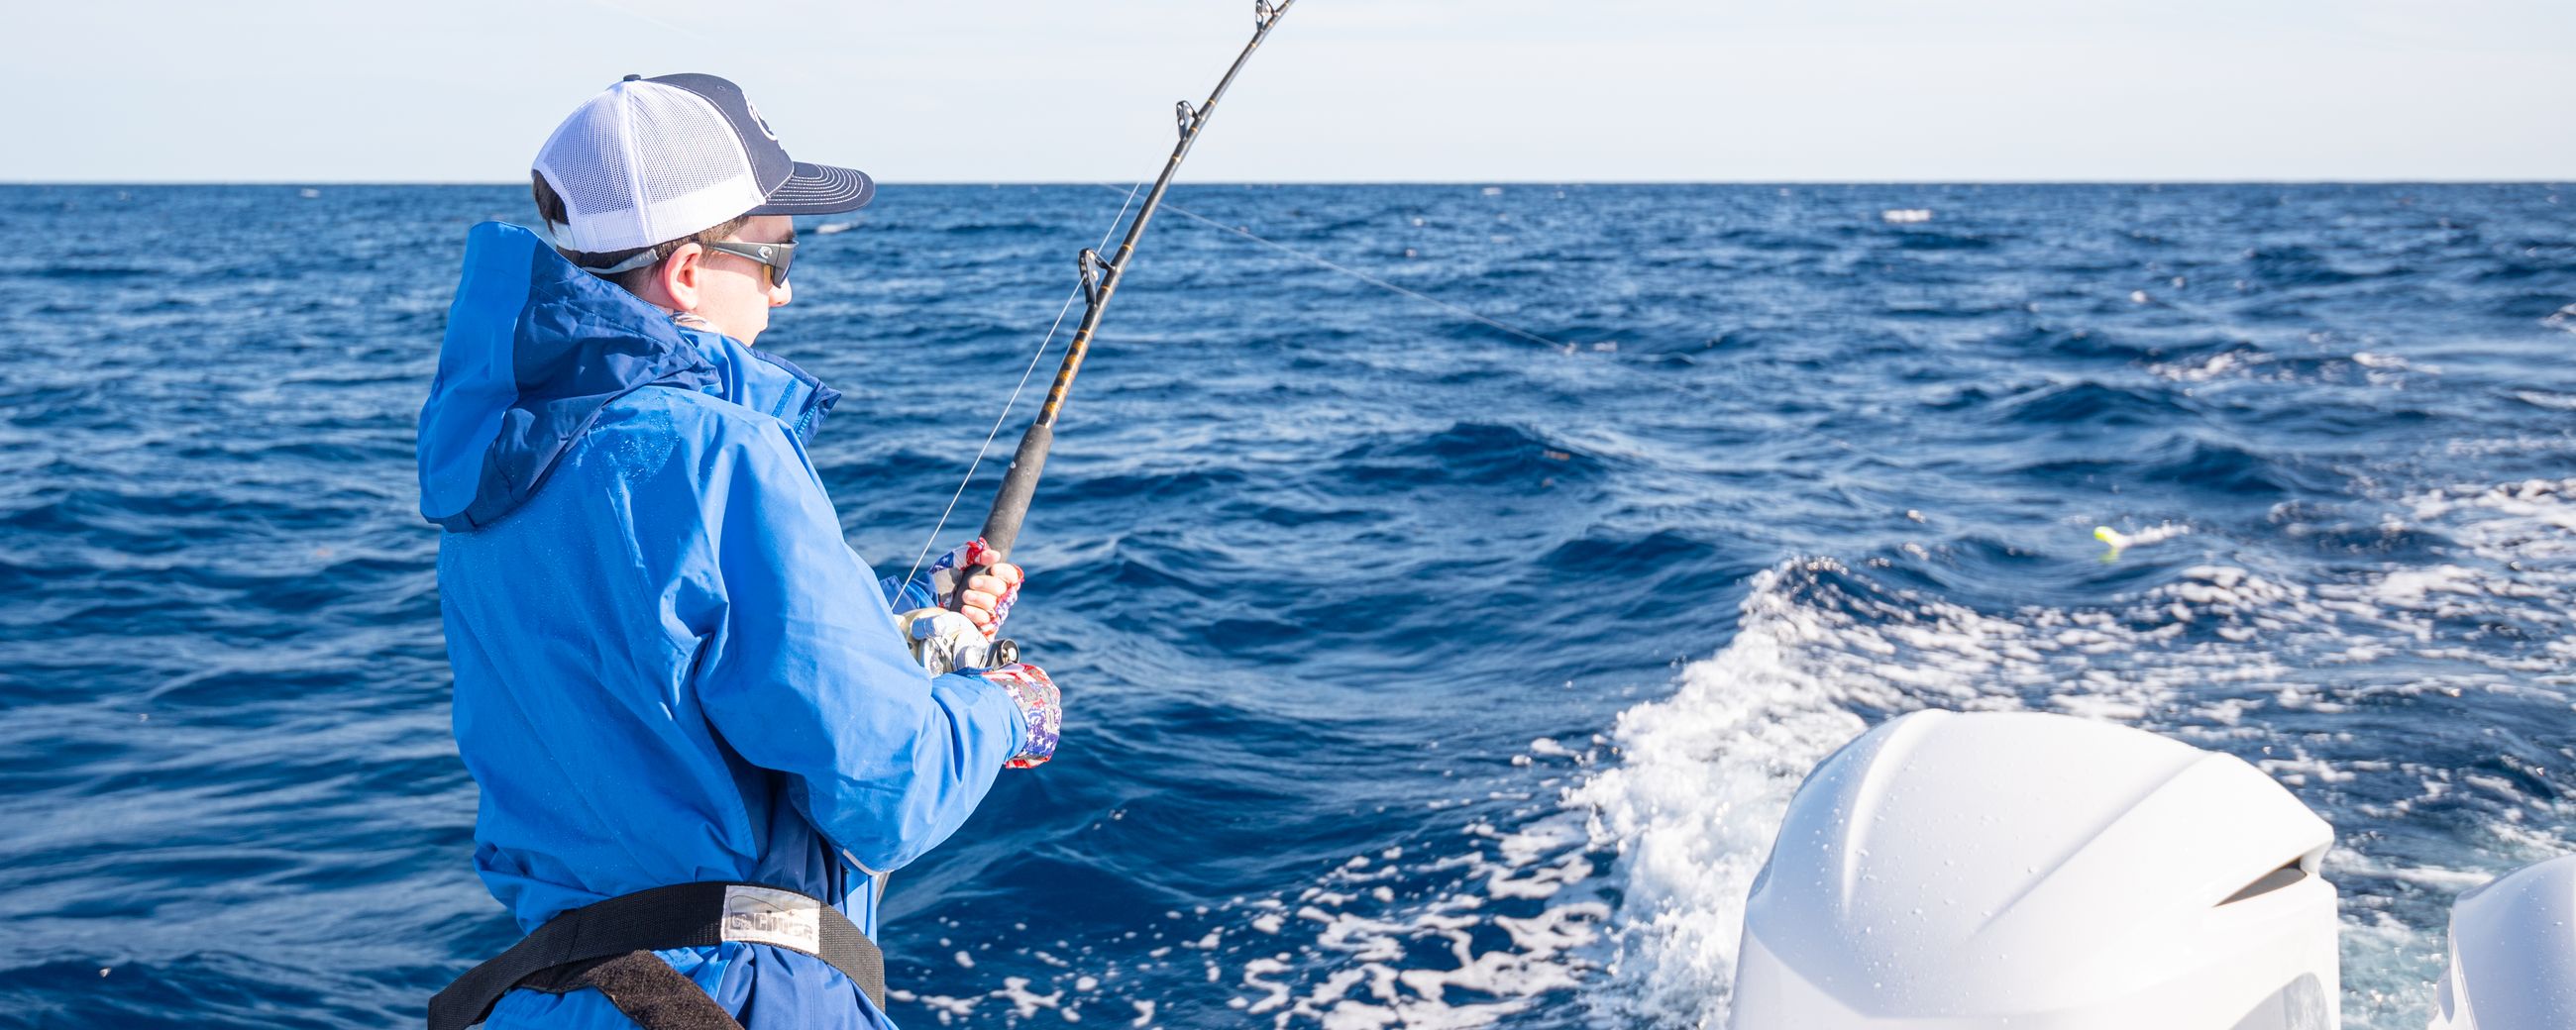 Young boy reeling in a fish offshore wearing a blue jacket